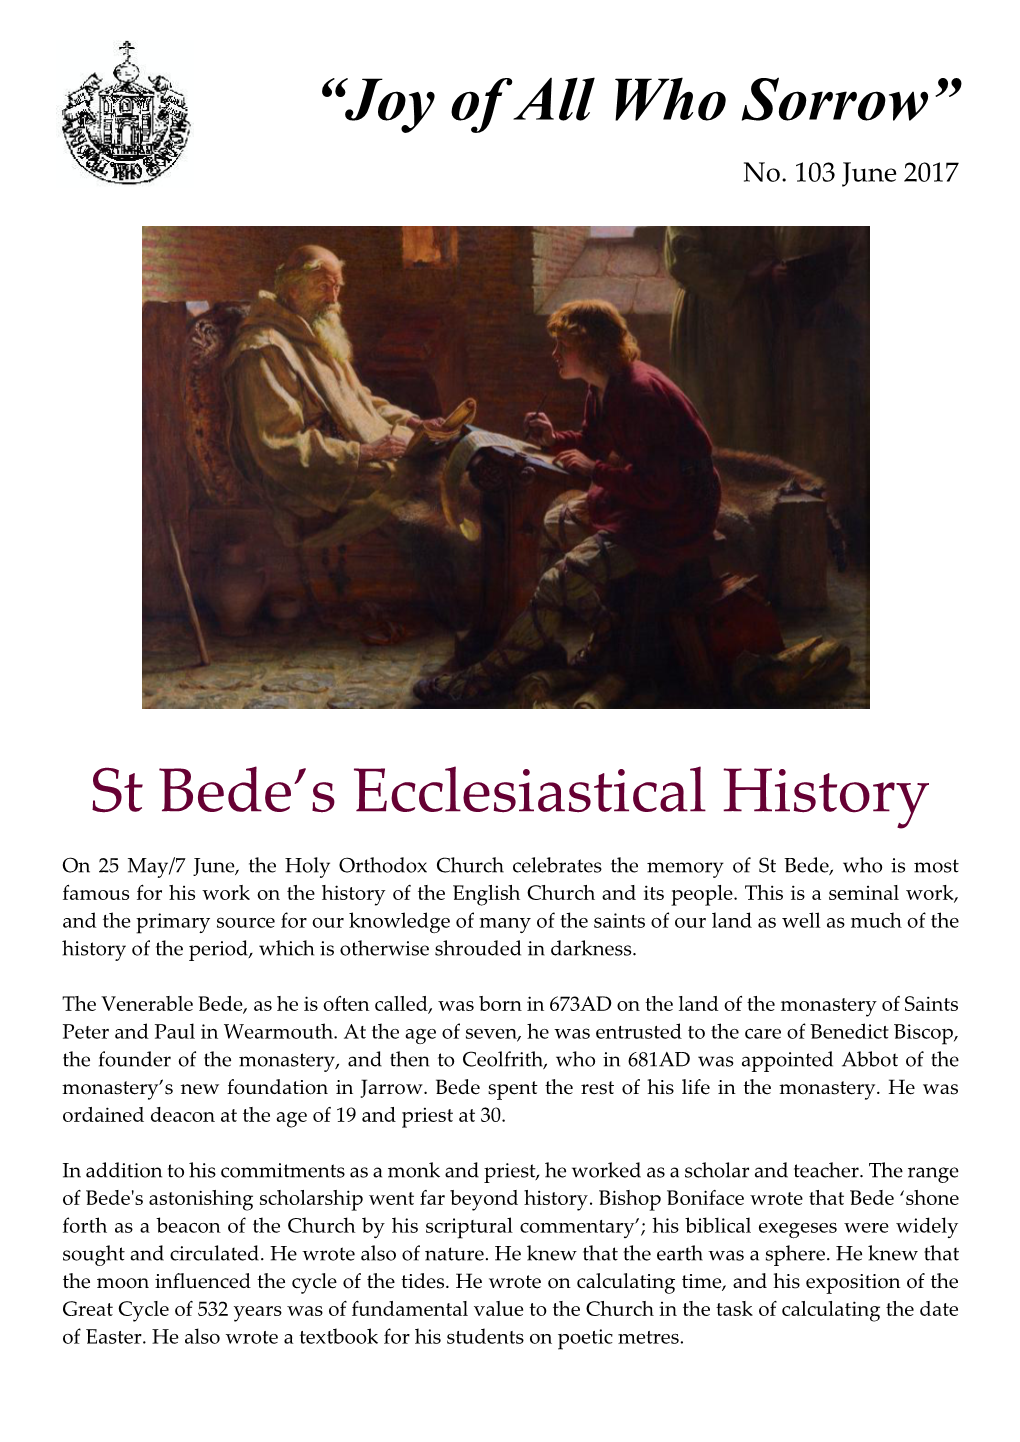 St Bede's Ecclesiastical History